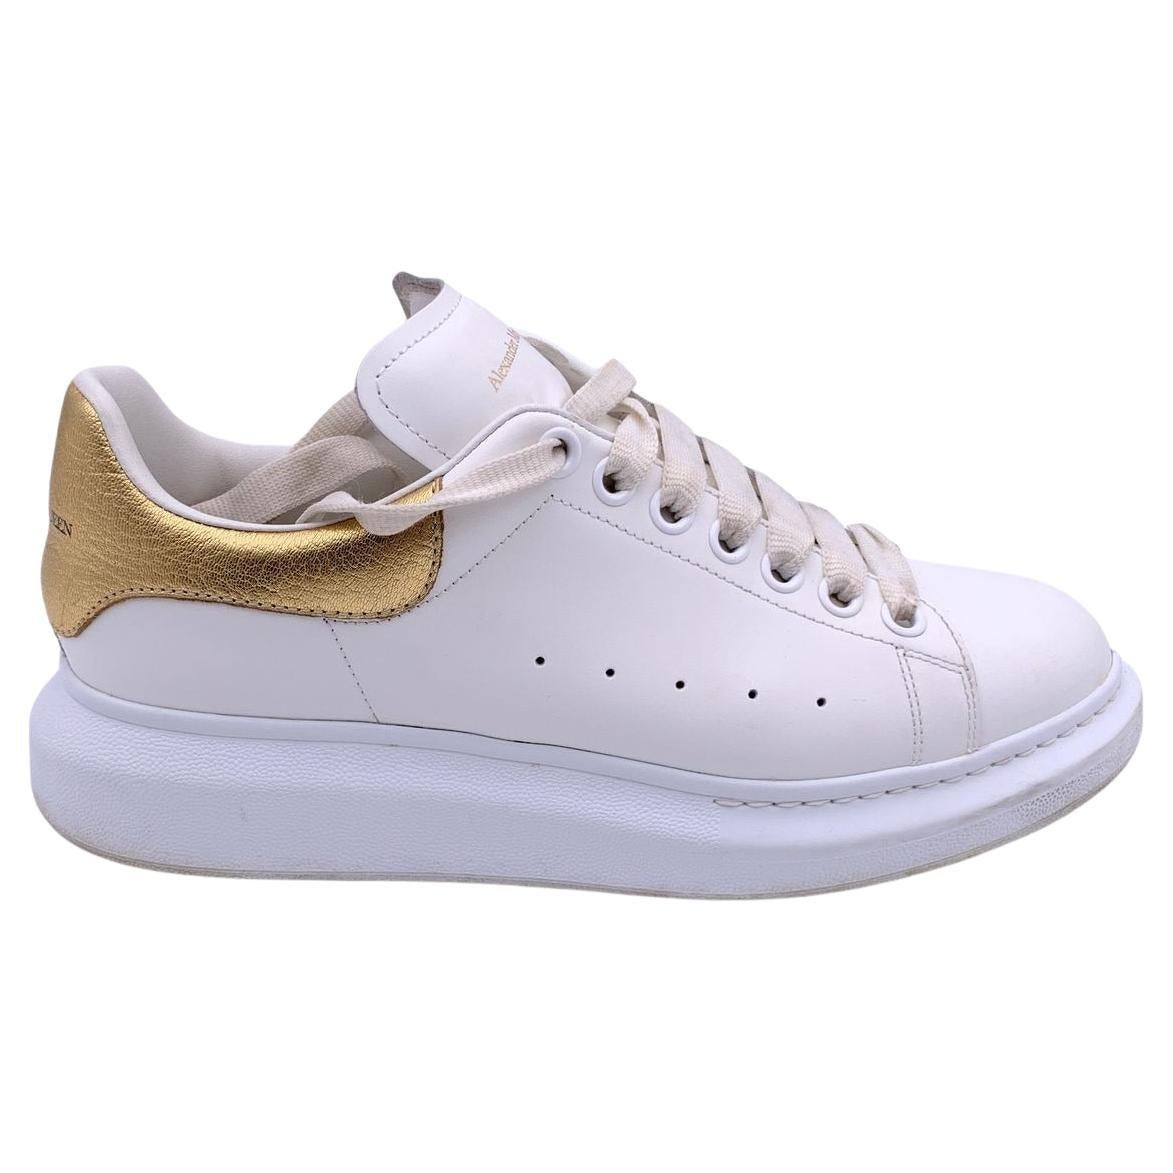 Alexander McQueen White Gold Lace Up Sneakers Shoes Size 40